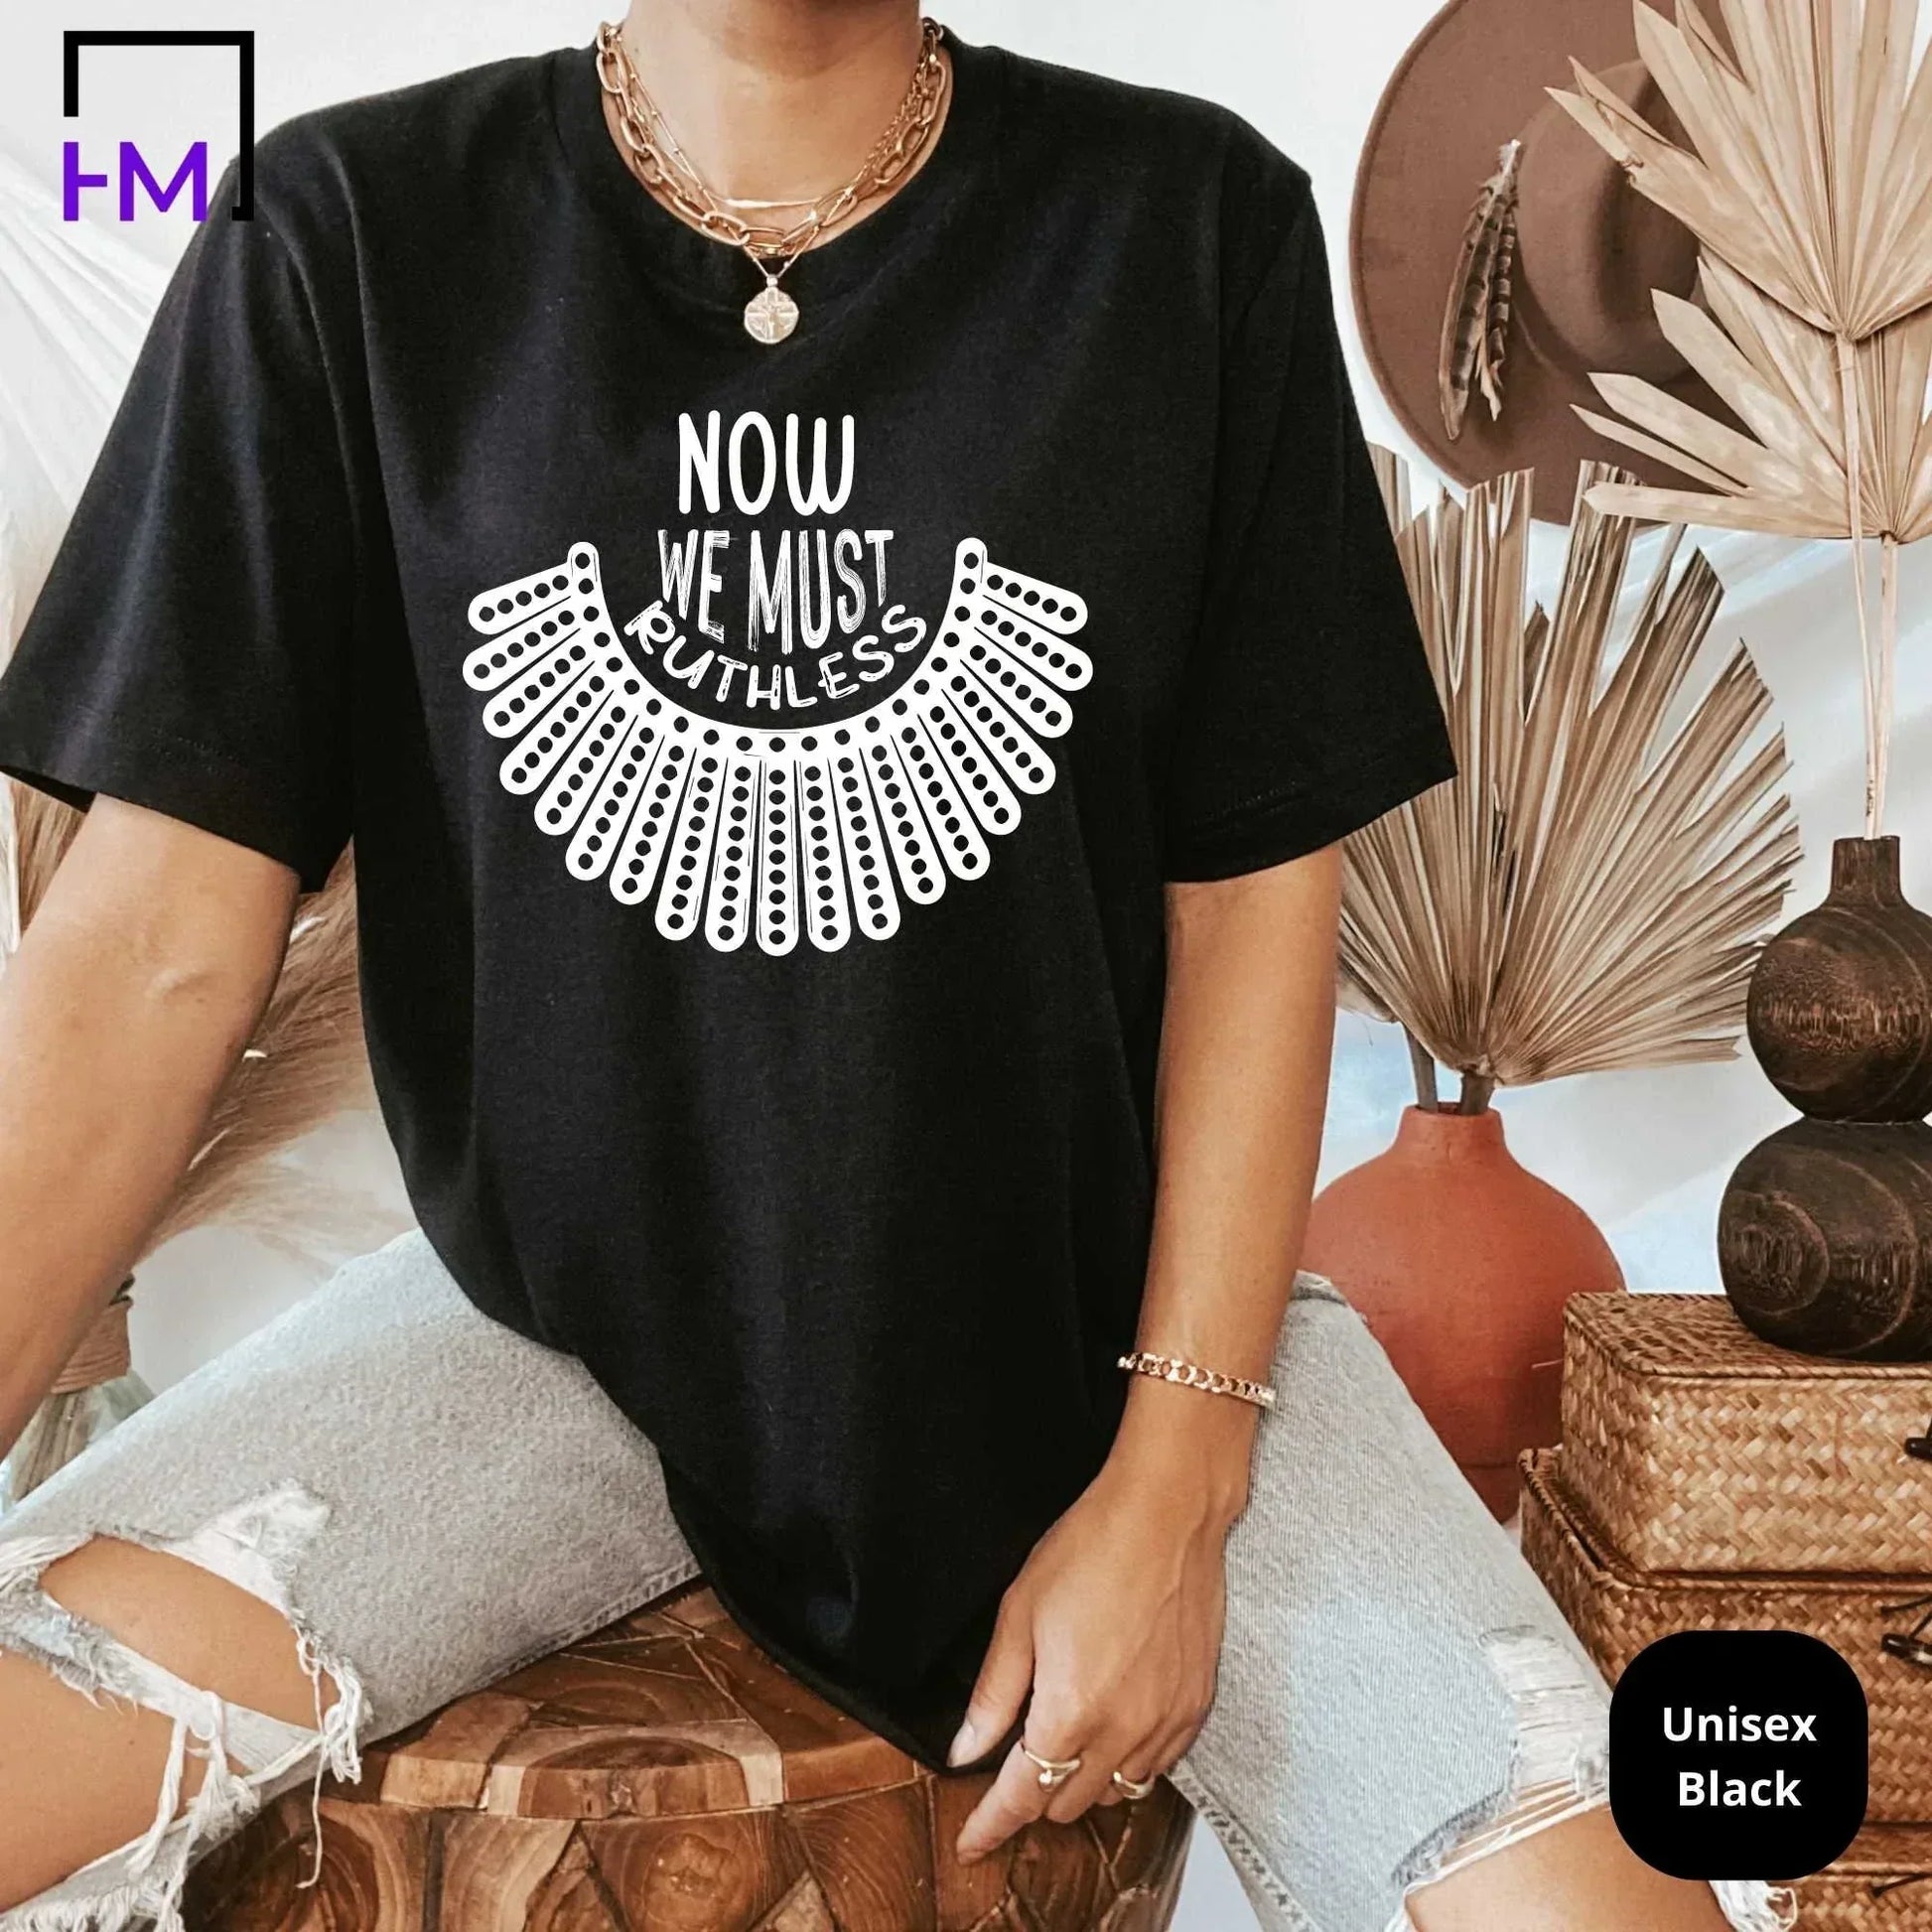 RBG Shirt| Ruthless Vote For Women's Equality, Human Rights, Reproductive, Feminism, Feminist Election, Political Tops, Tees & Sweatshirts HMDesignStudioUS